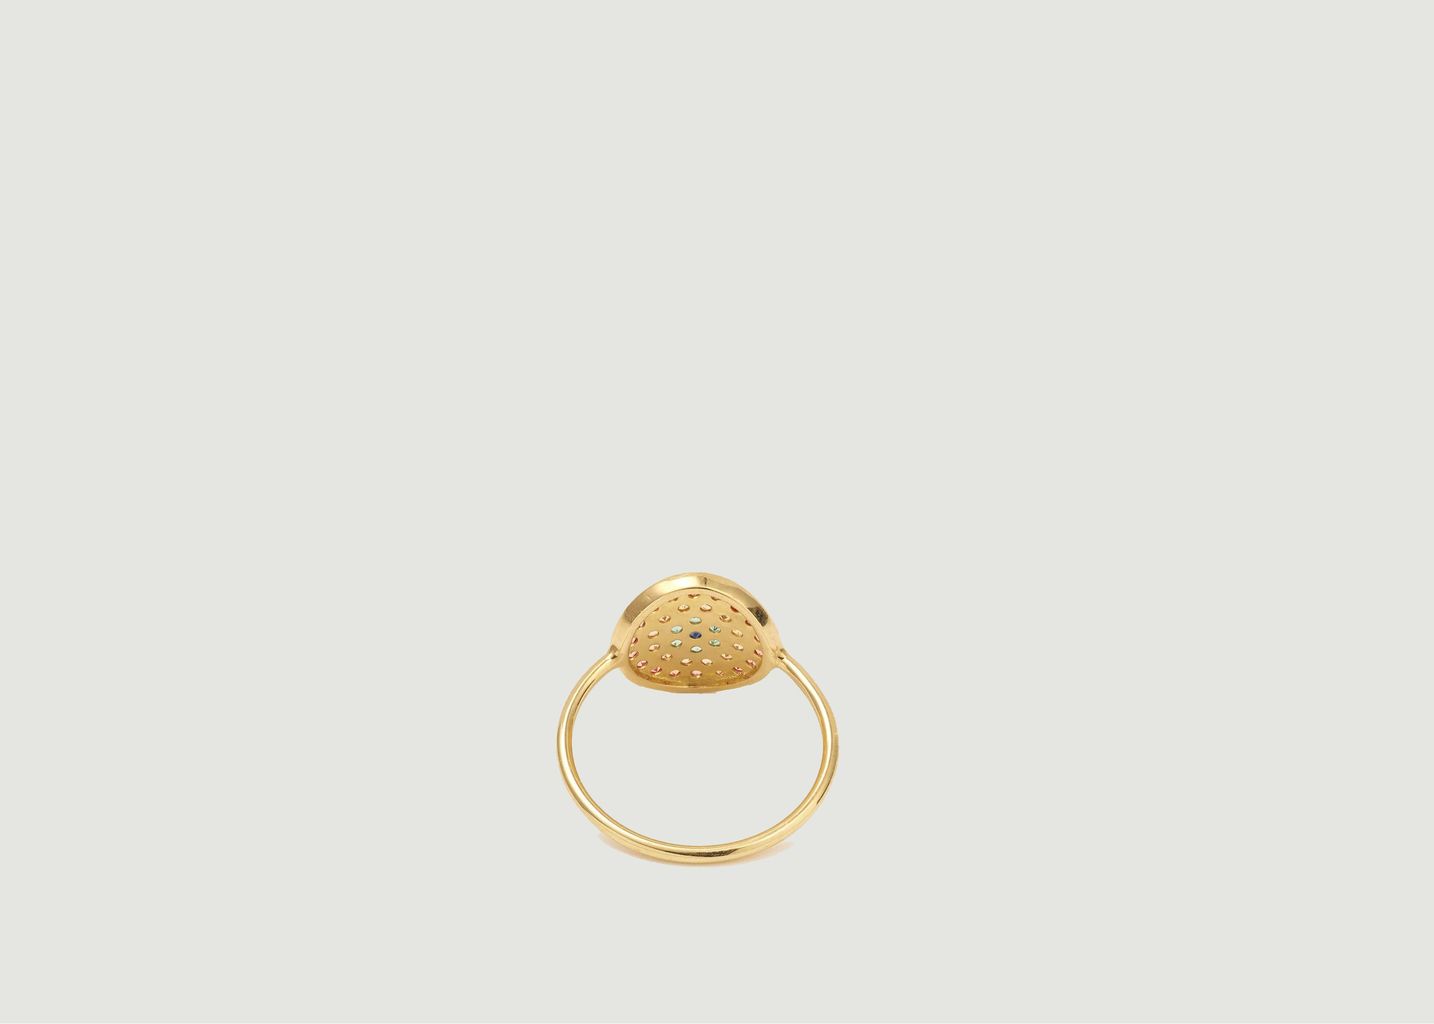 Yellowstone 1 Cognac ring - Sophie d'Agon